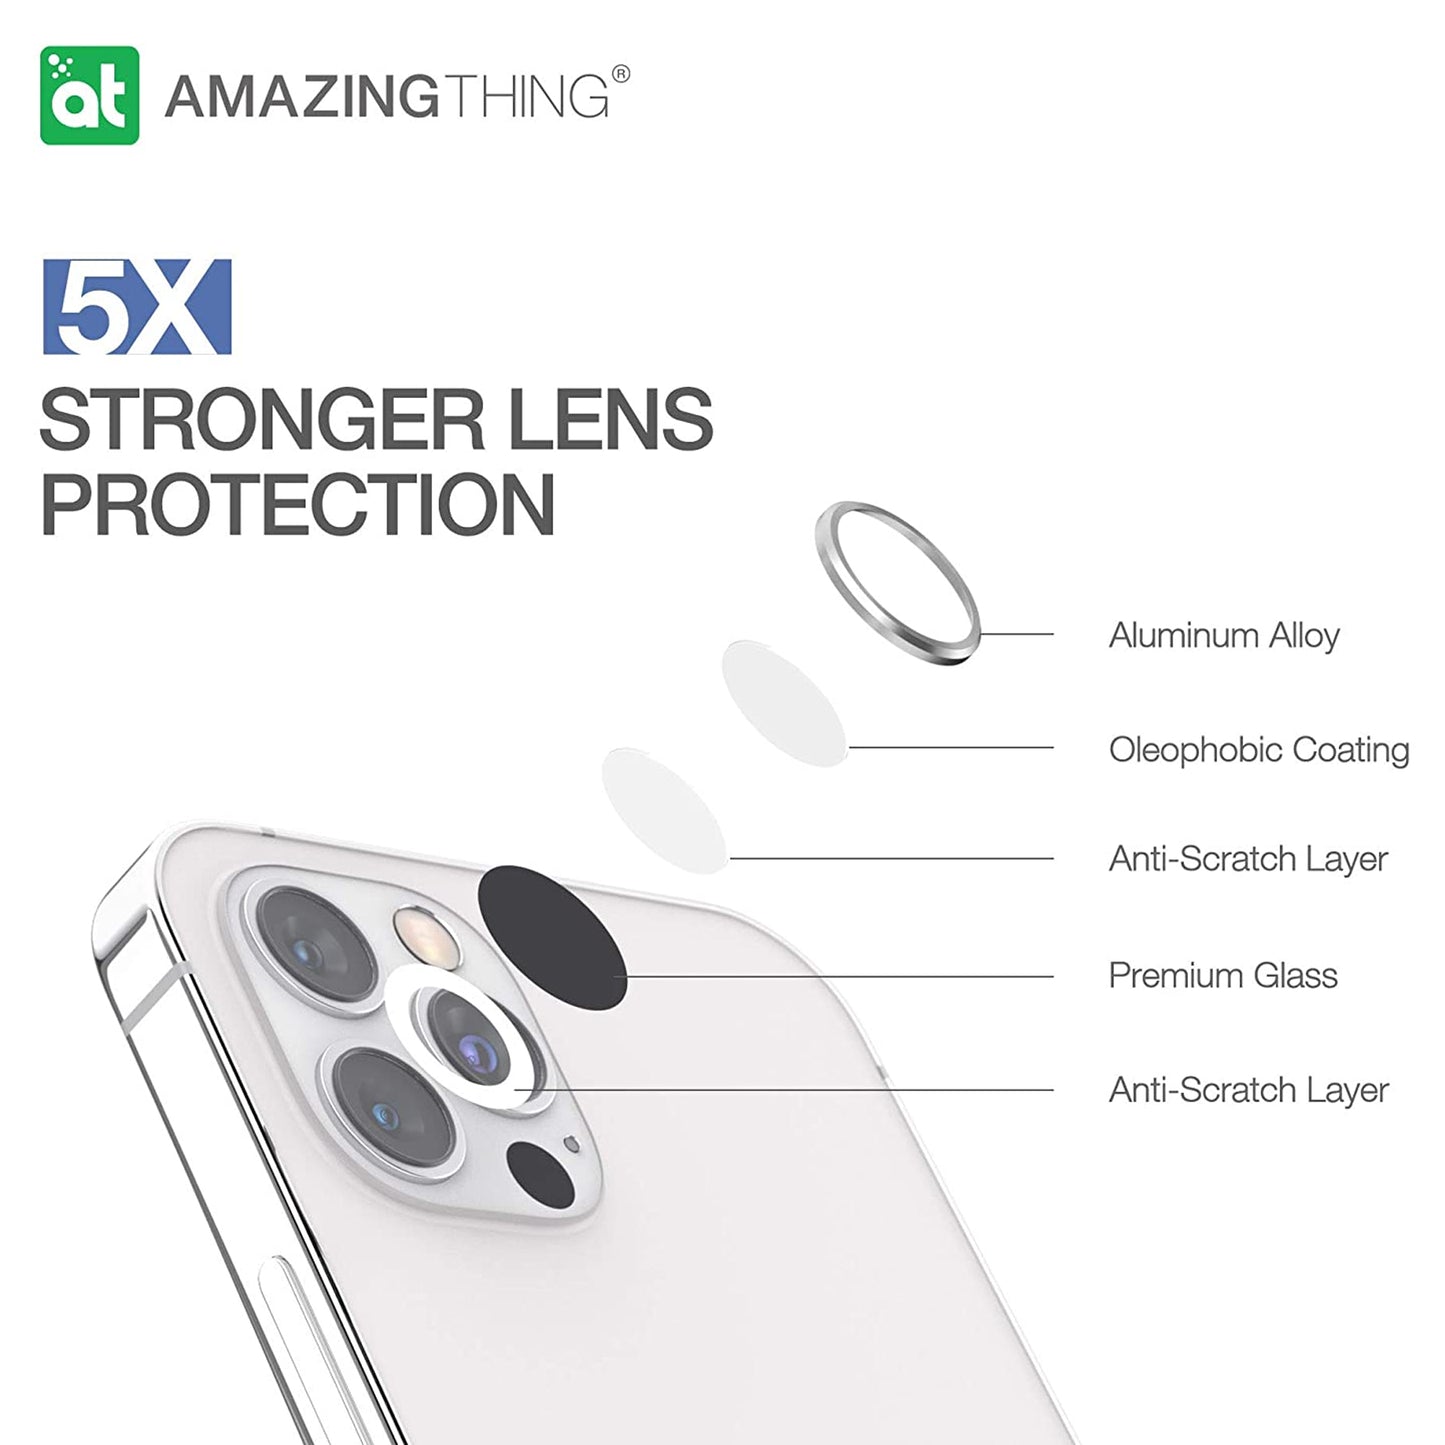 AMAZINGthing SUPREME AR 3D LensGlass Protector for iPhone 13 Pro 6.1" 5G ( Three Lens ) - Silver (Barcode: 4892878069502 )